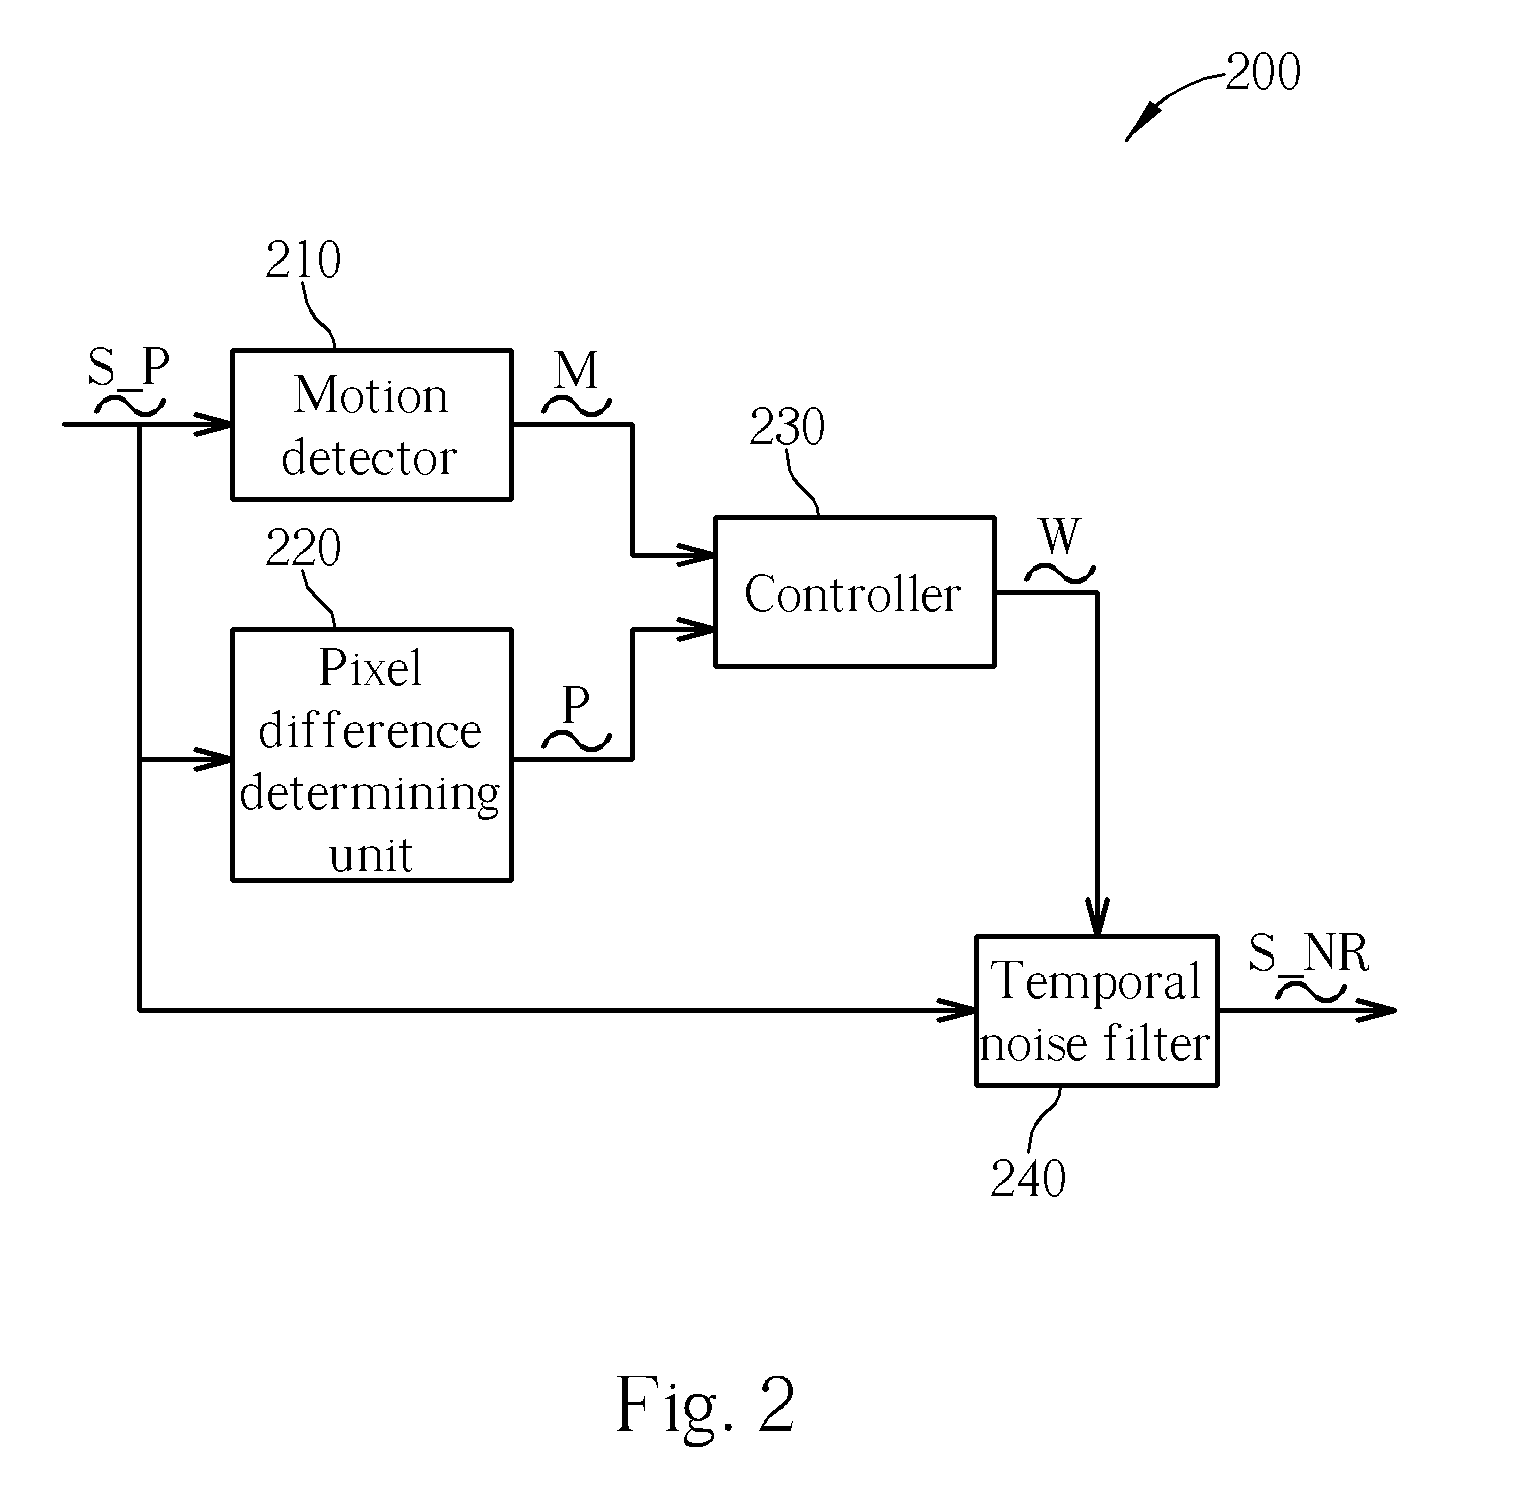 Apparatus and method for reducing temporal noise